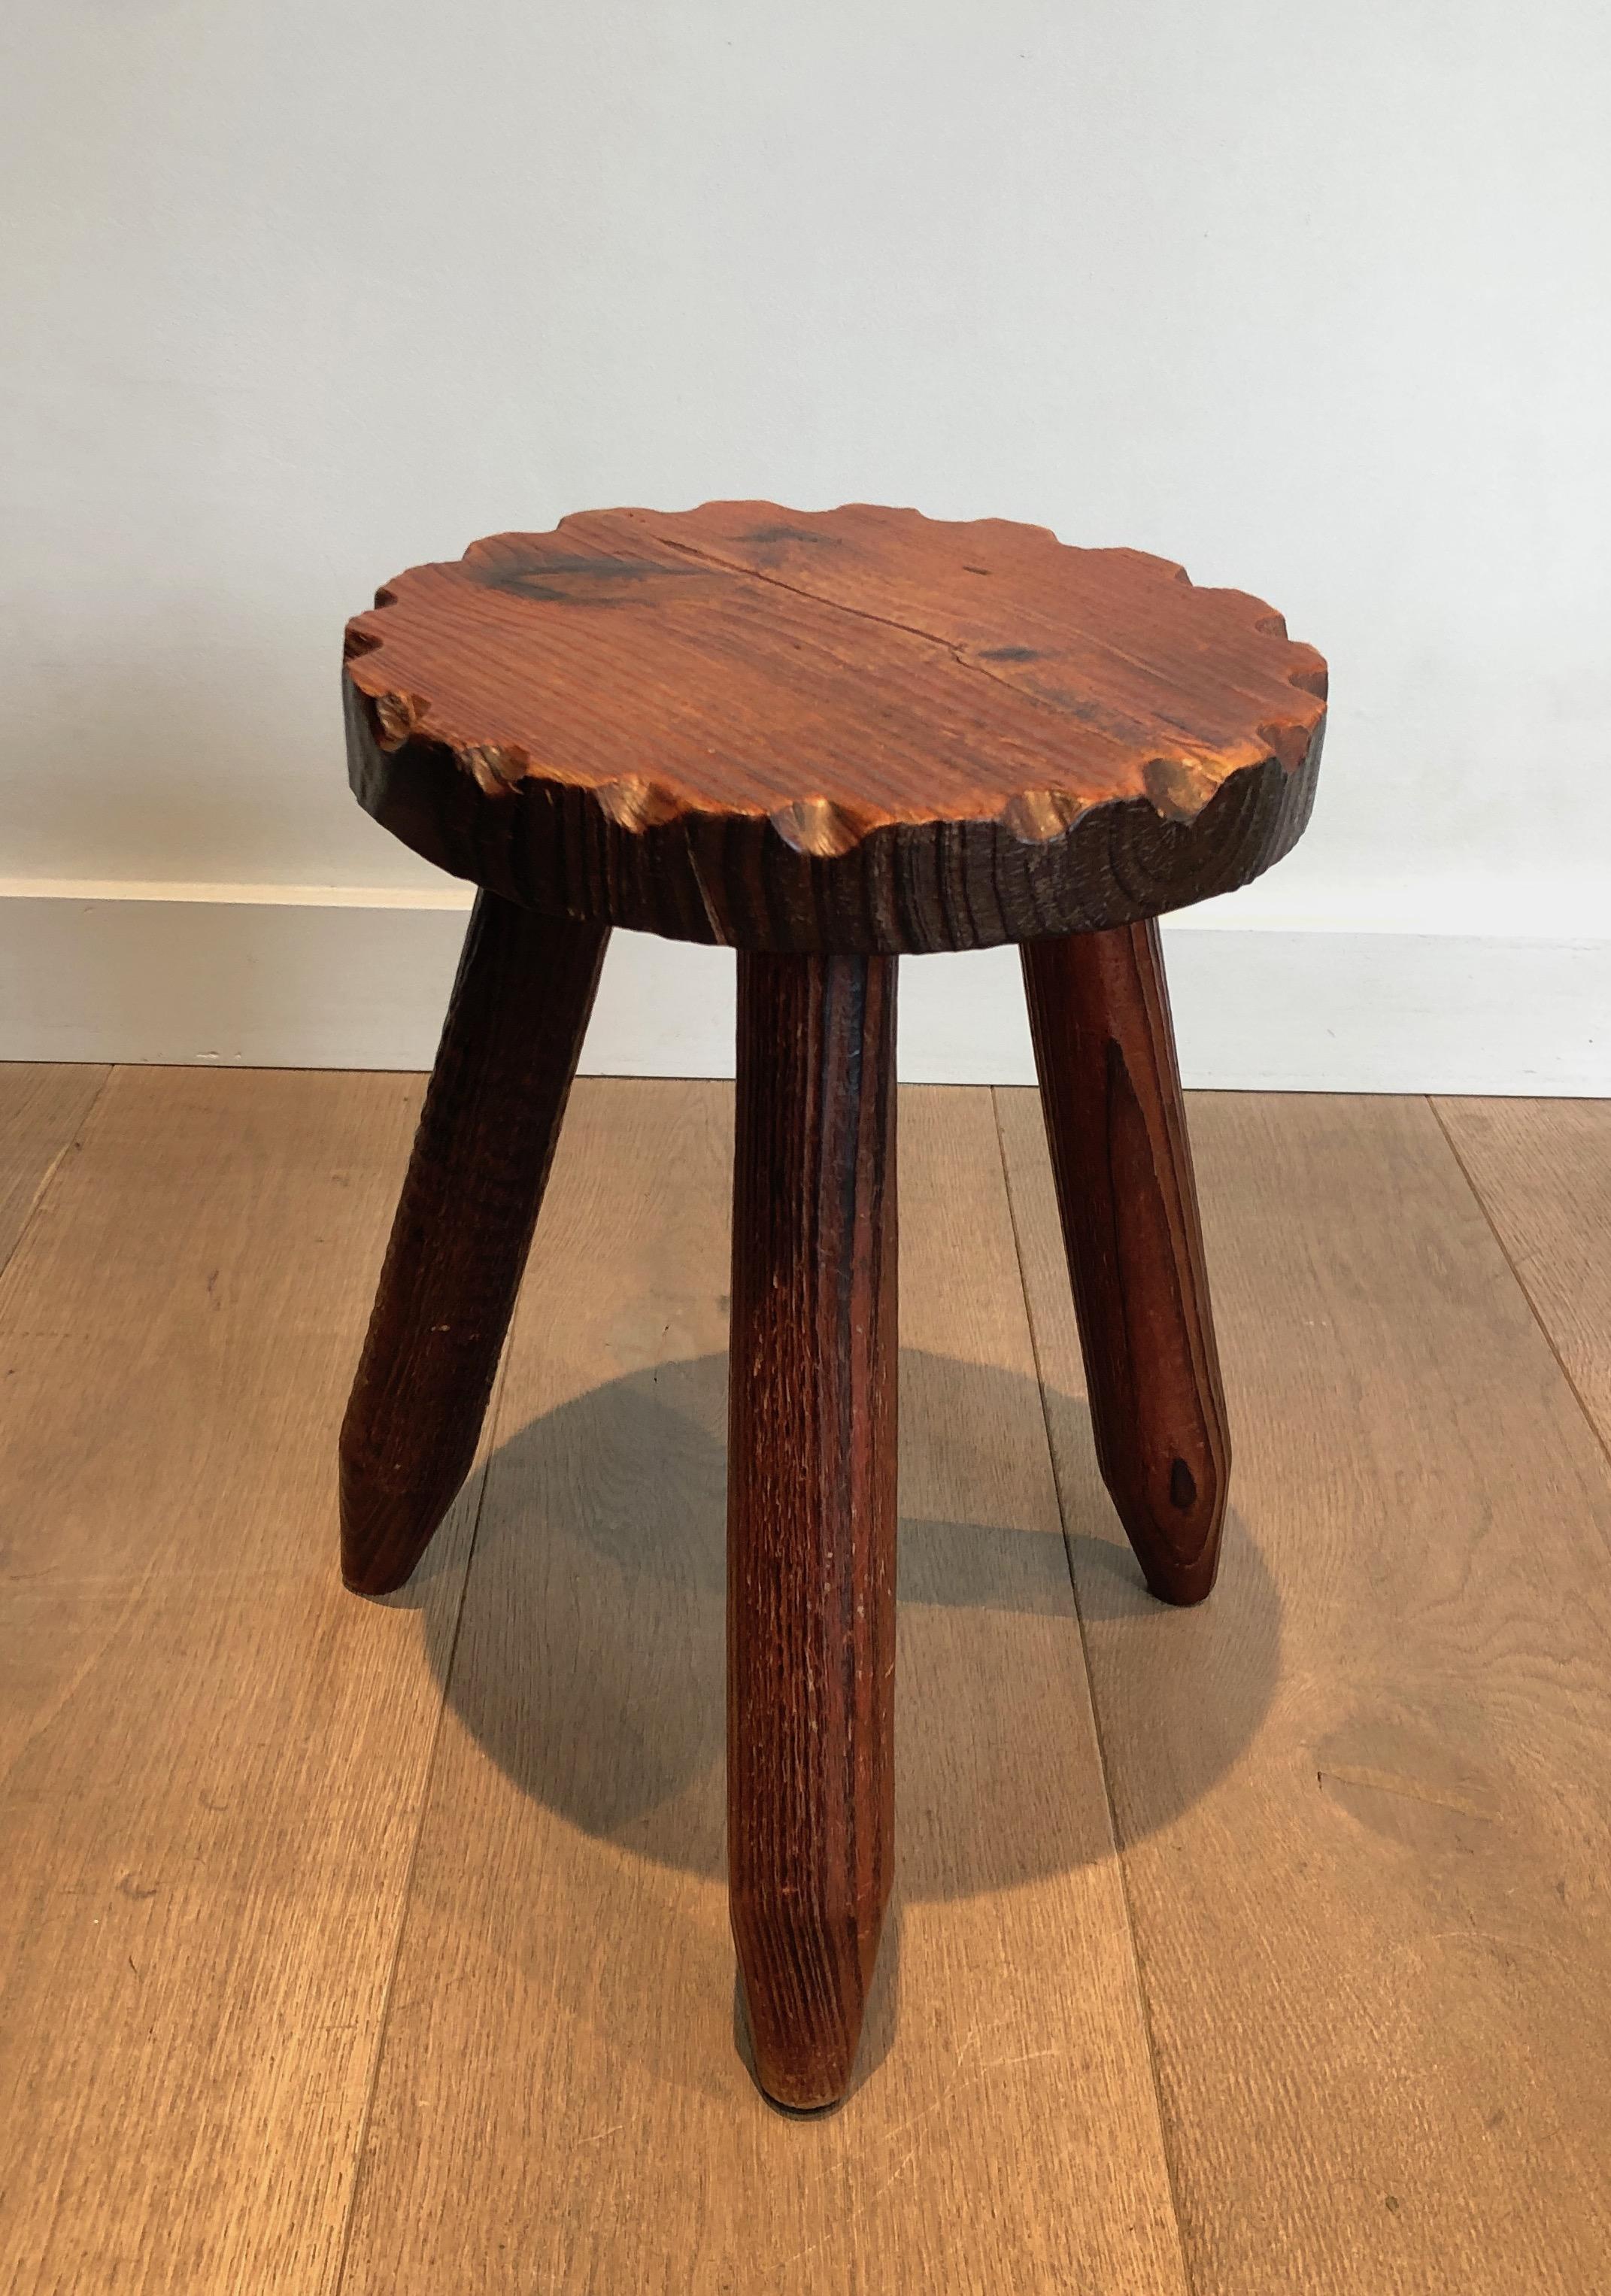 Pair of Pine Brutalist Stools, French Work, circa 1950 For Sale 2